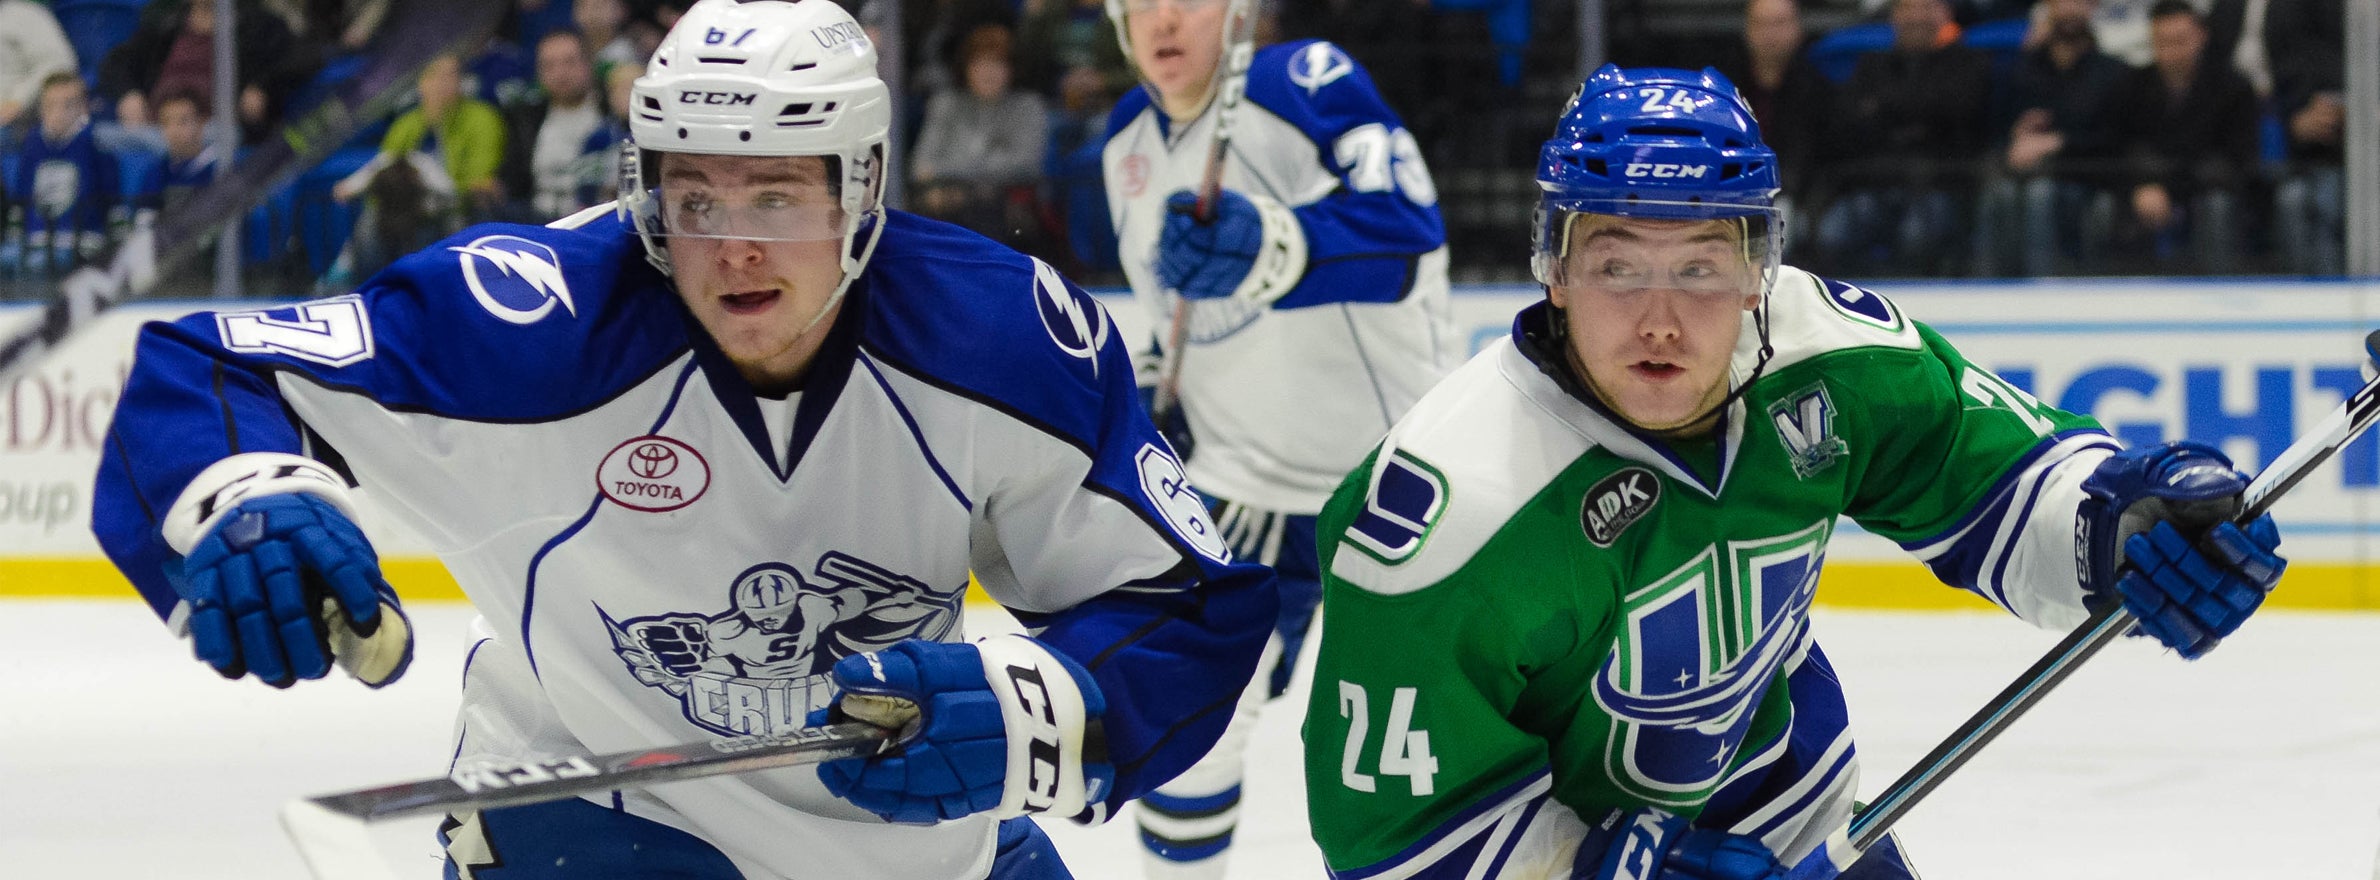 COMETS KICKOFF HOME-AND-HOME SERIES WITH CRUNCH TONIGHT